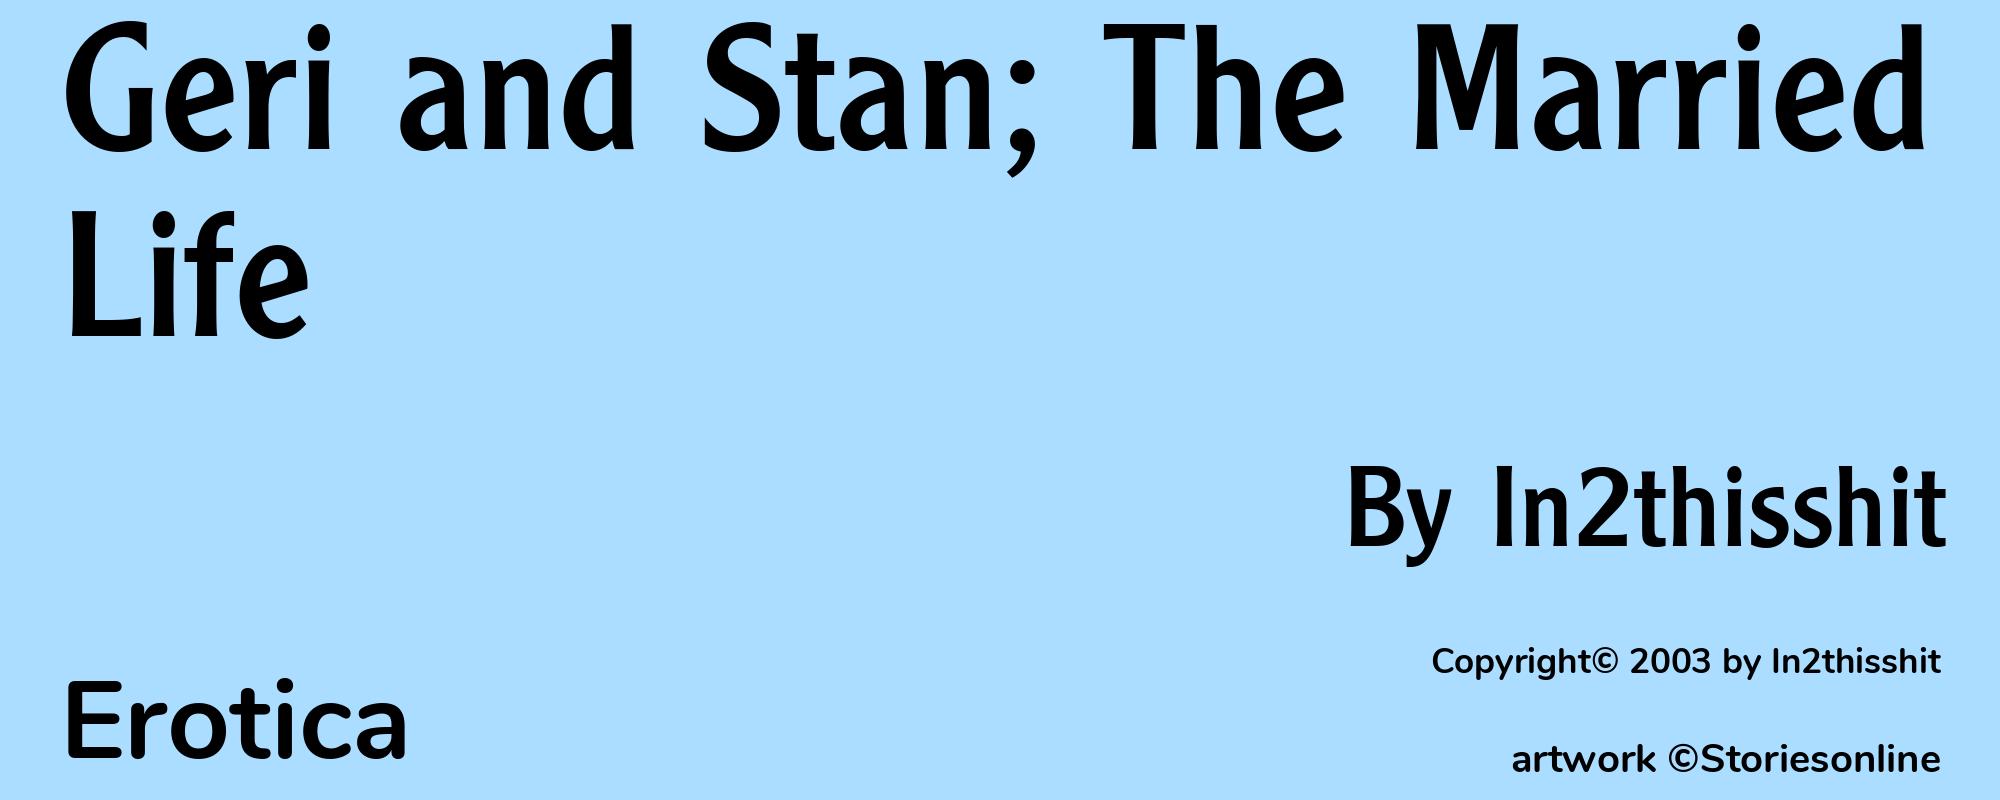 Geri and Stan; The Married Life - Cover